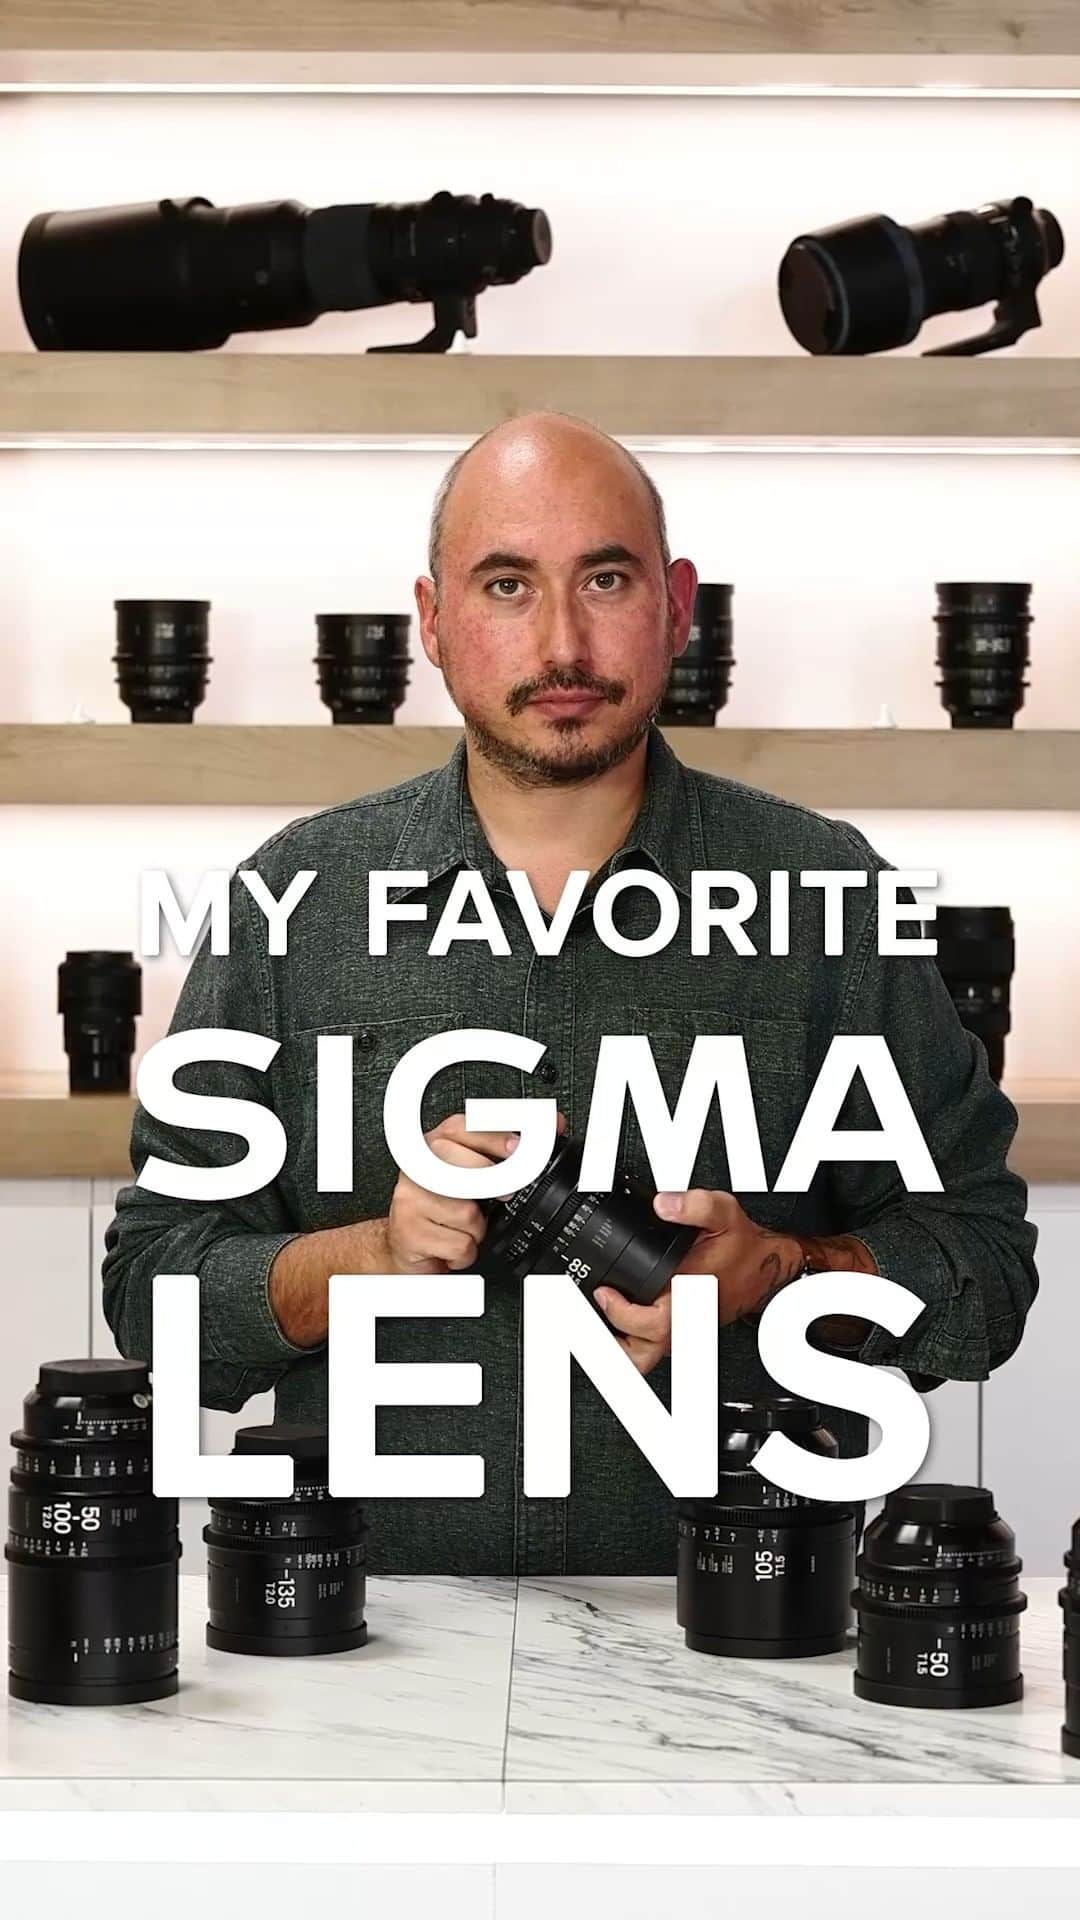 Sigma Corp Of America（シグマ）のインスタグラム：「❤️ What is *your* favorite SIGMA Lens? ❤️  #MyFavoriteSIGMALens  @sigmacine Ambassador and DP Timur Civan @timurcivan has earned his reputation making products look their absolute best, and when he does a tabletop shoot, he reaches for the SIGMA CINE 85mm T1.5. "This one is my workhorse. I use this for everything." This particular focal length is ideal for Timur's type of work, and combined with other SIGMA CINE lenses, color grading and editing is easier due to the consistent high quality of the glass.  This CINE LENS and the entire lineup of Full-Frame High Speed Primes are available for Canon EF, Sony E and PL/i mounts.  Post a story or video about your favorite SIGMA lens with #MyFavoriteSIGMALens to be featured in our stories!  And if you don't have a favorite SIGMA lens yet, check out sigmaphoto.com (link in our bio) and see what we have to offer. For cinematographers, video creators, and still photographers, there's a perfect SIGMA lens for you.  #SIGMA #SIGMACINE #sigmaphoto #cinematography #photography #sigmalens #sigmalenses #favoritethings」